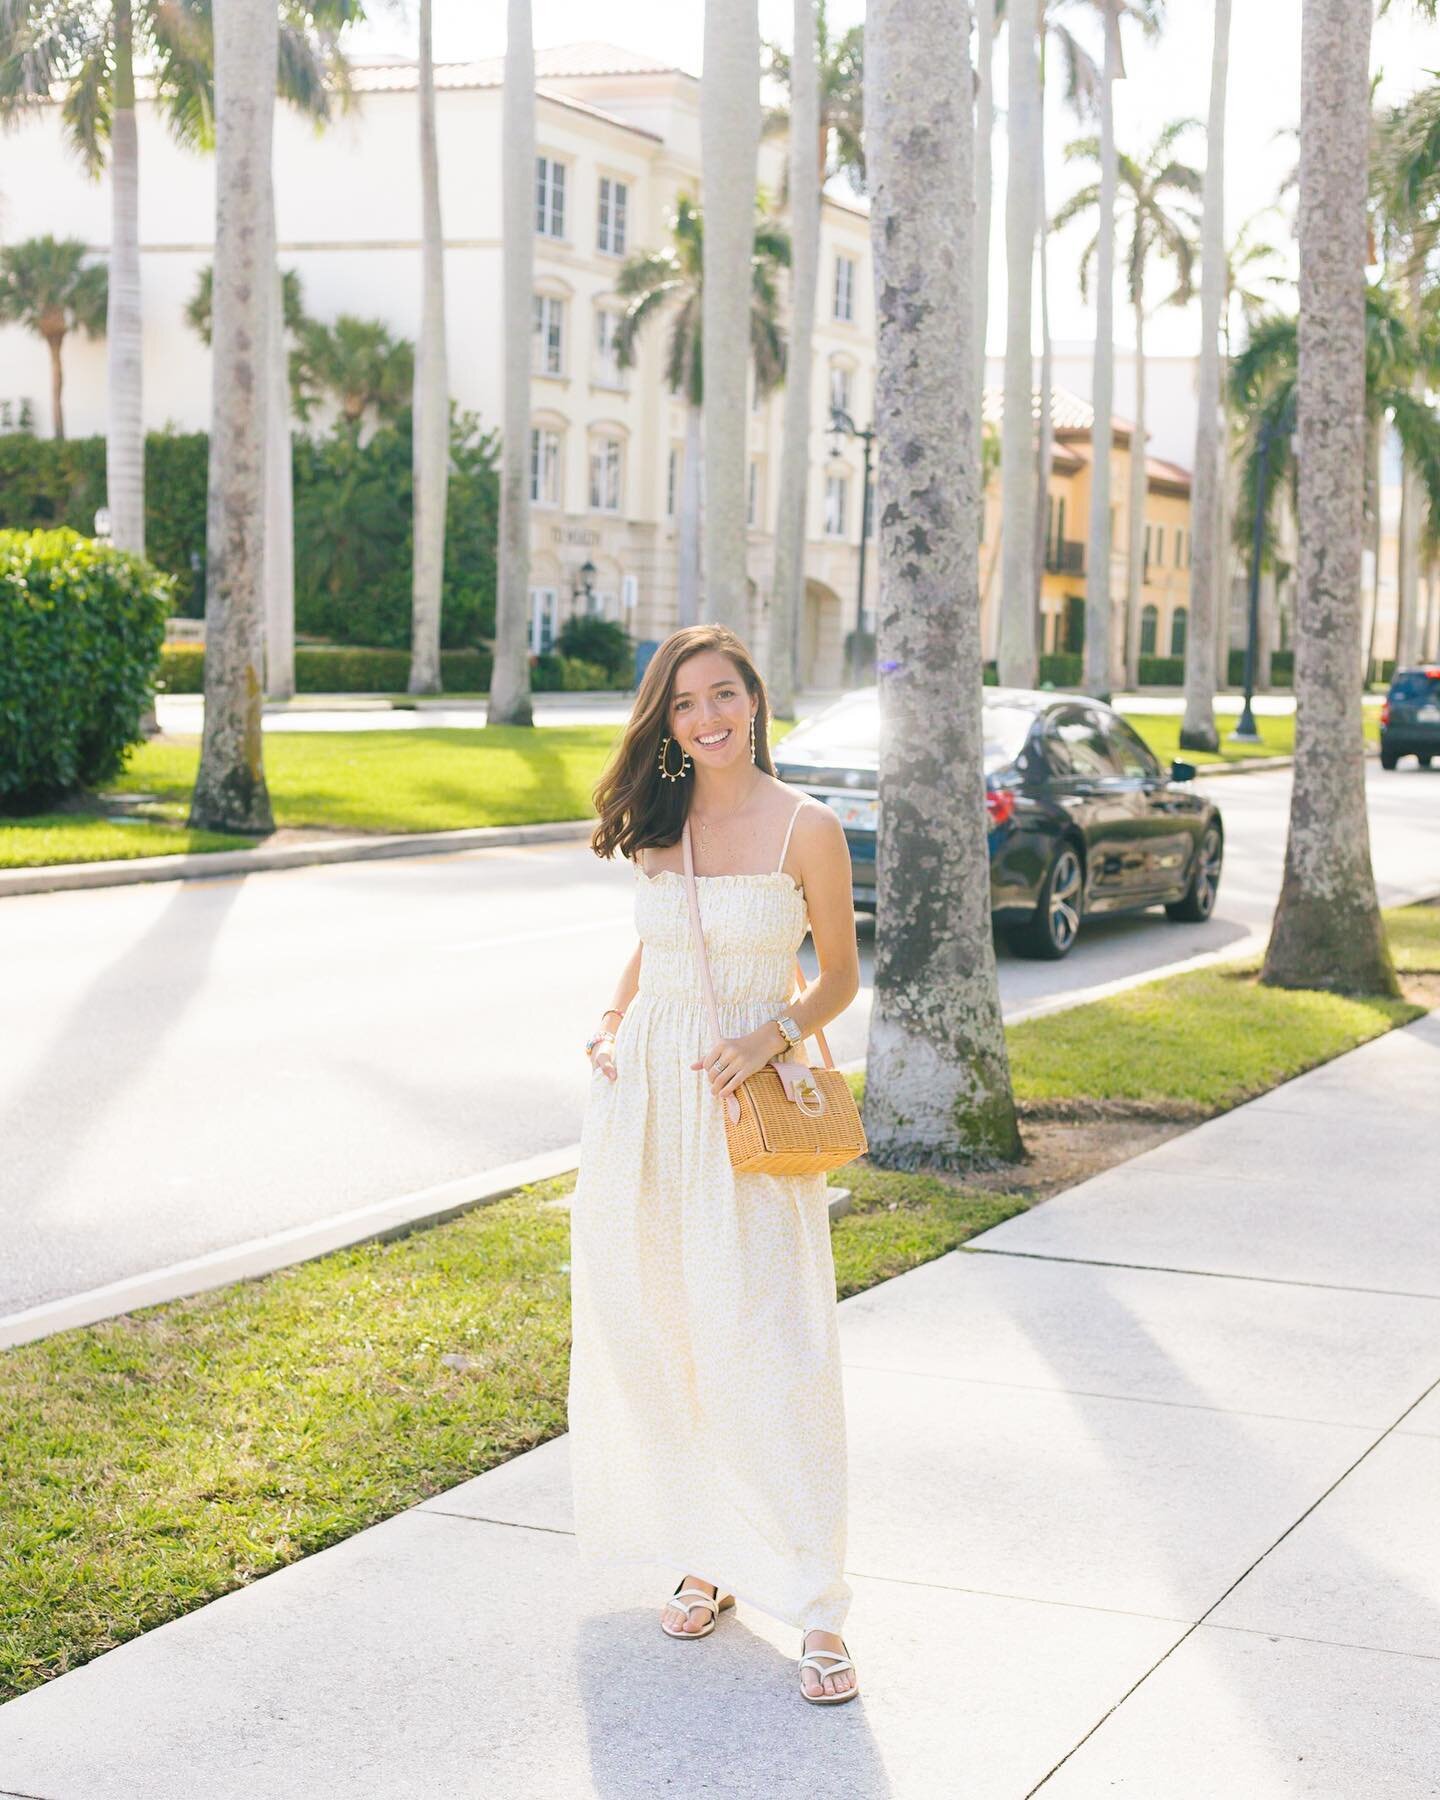 always sunny in Palm Beach ☀️ will be living in breezy cotton dresses like this one from @cocoshopwi all summer long! 🌴 // I&rsquo;ve been eyeing all the pretty new summer dresses arriving in stores lately and just linked 12 of my favorites in the @